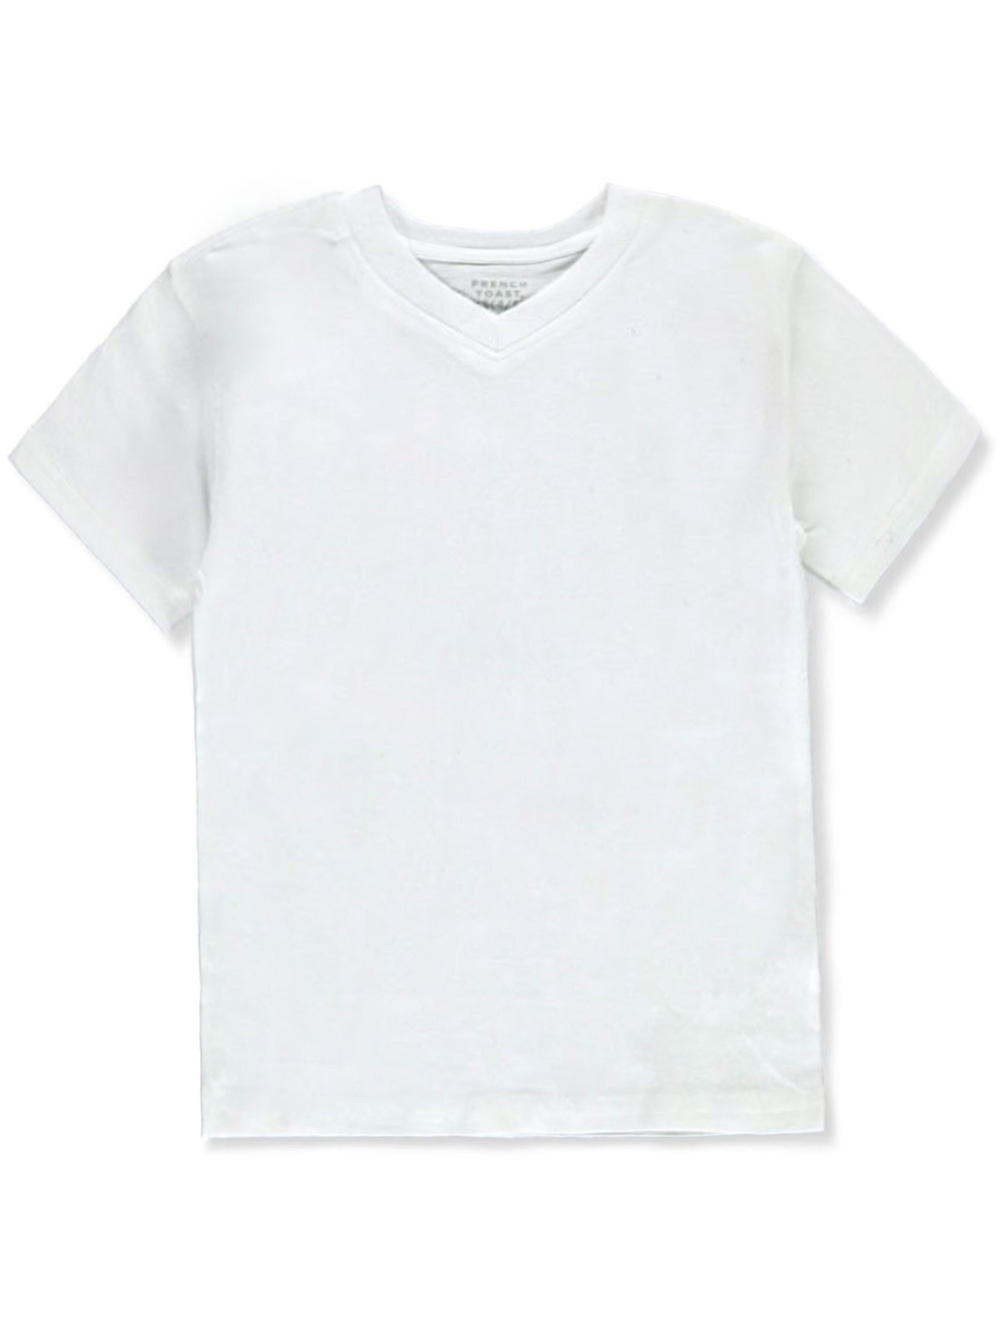 Size 4 T-Shirts for Boys